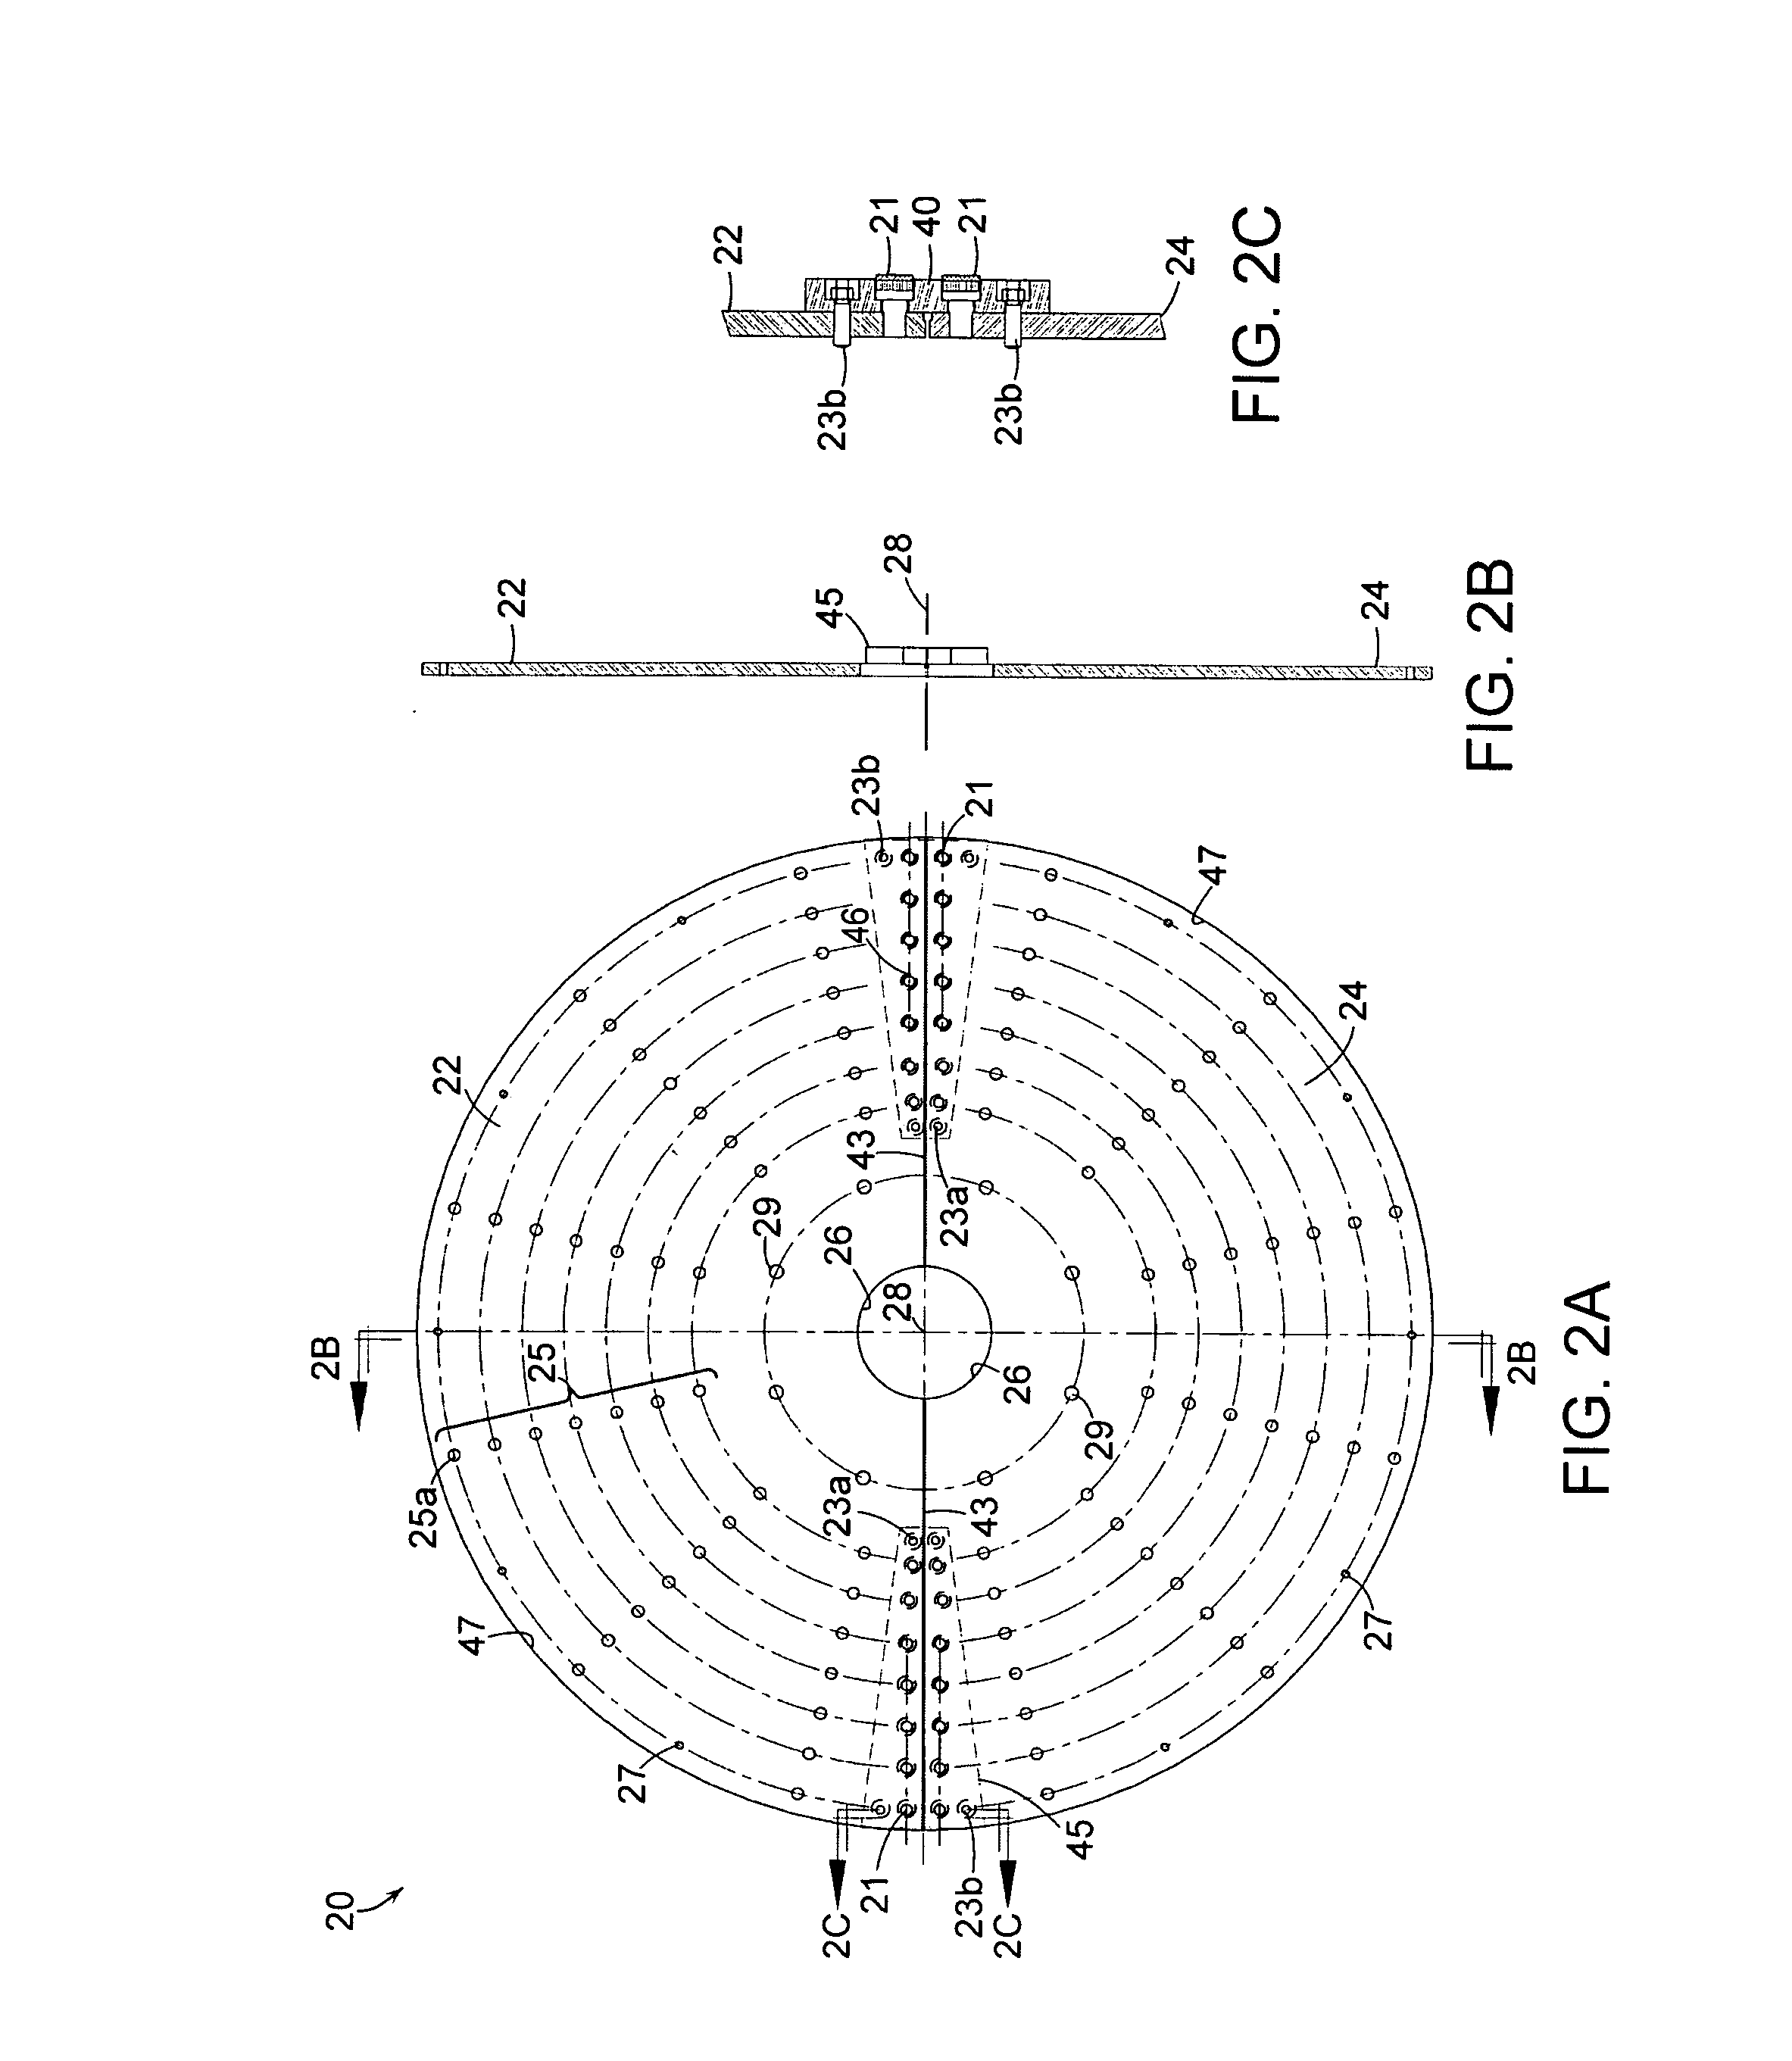 Split fan wheel and split shroud assemblies and methods of manufacturing and assembling the same